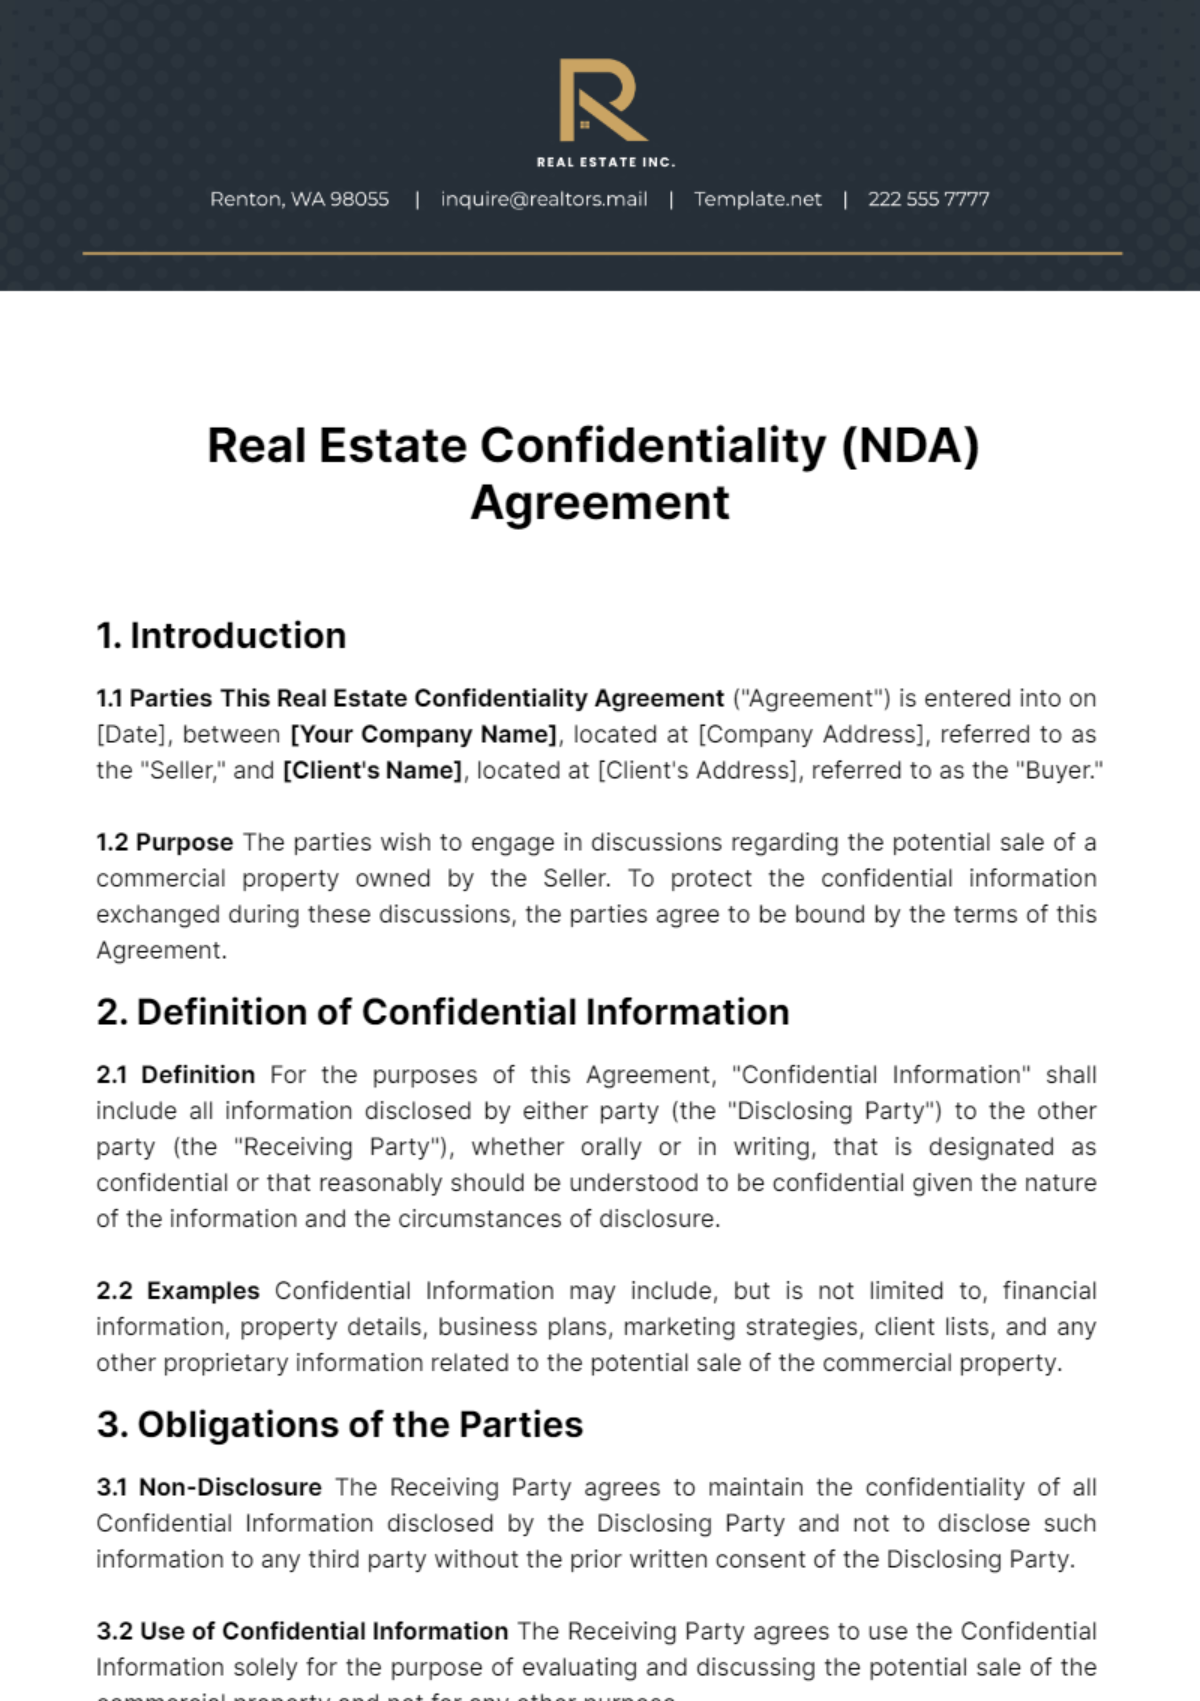 Real Estate Confidentiality (NDA) Agreement Template